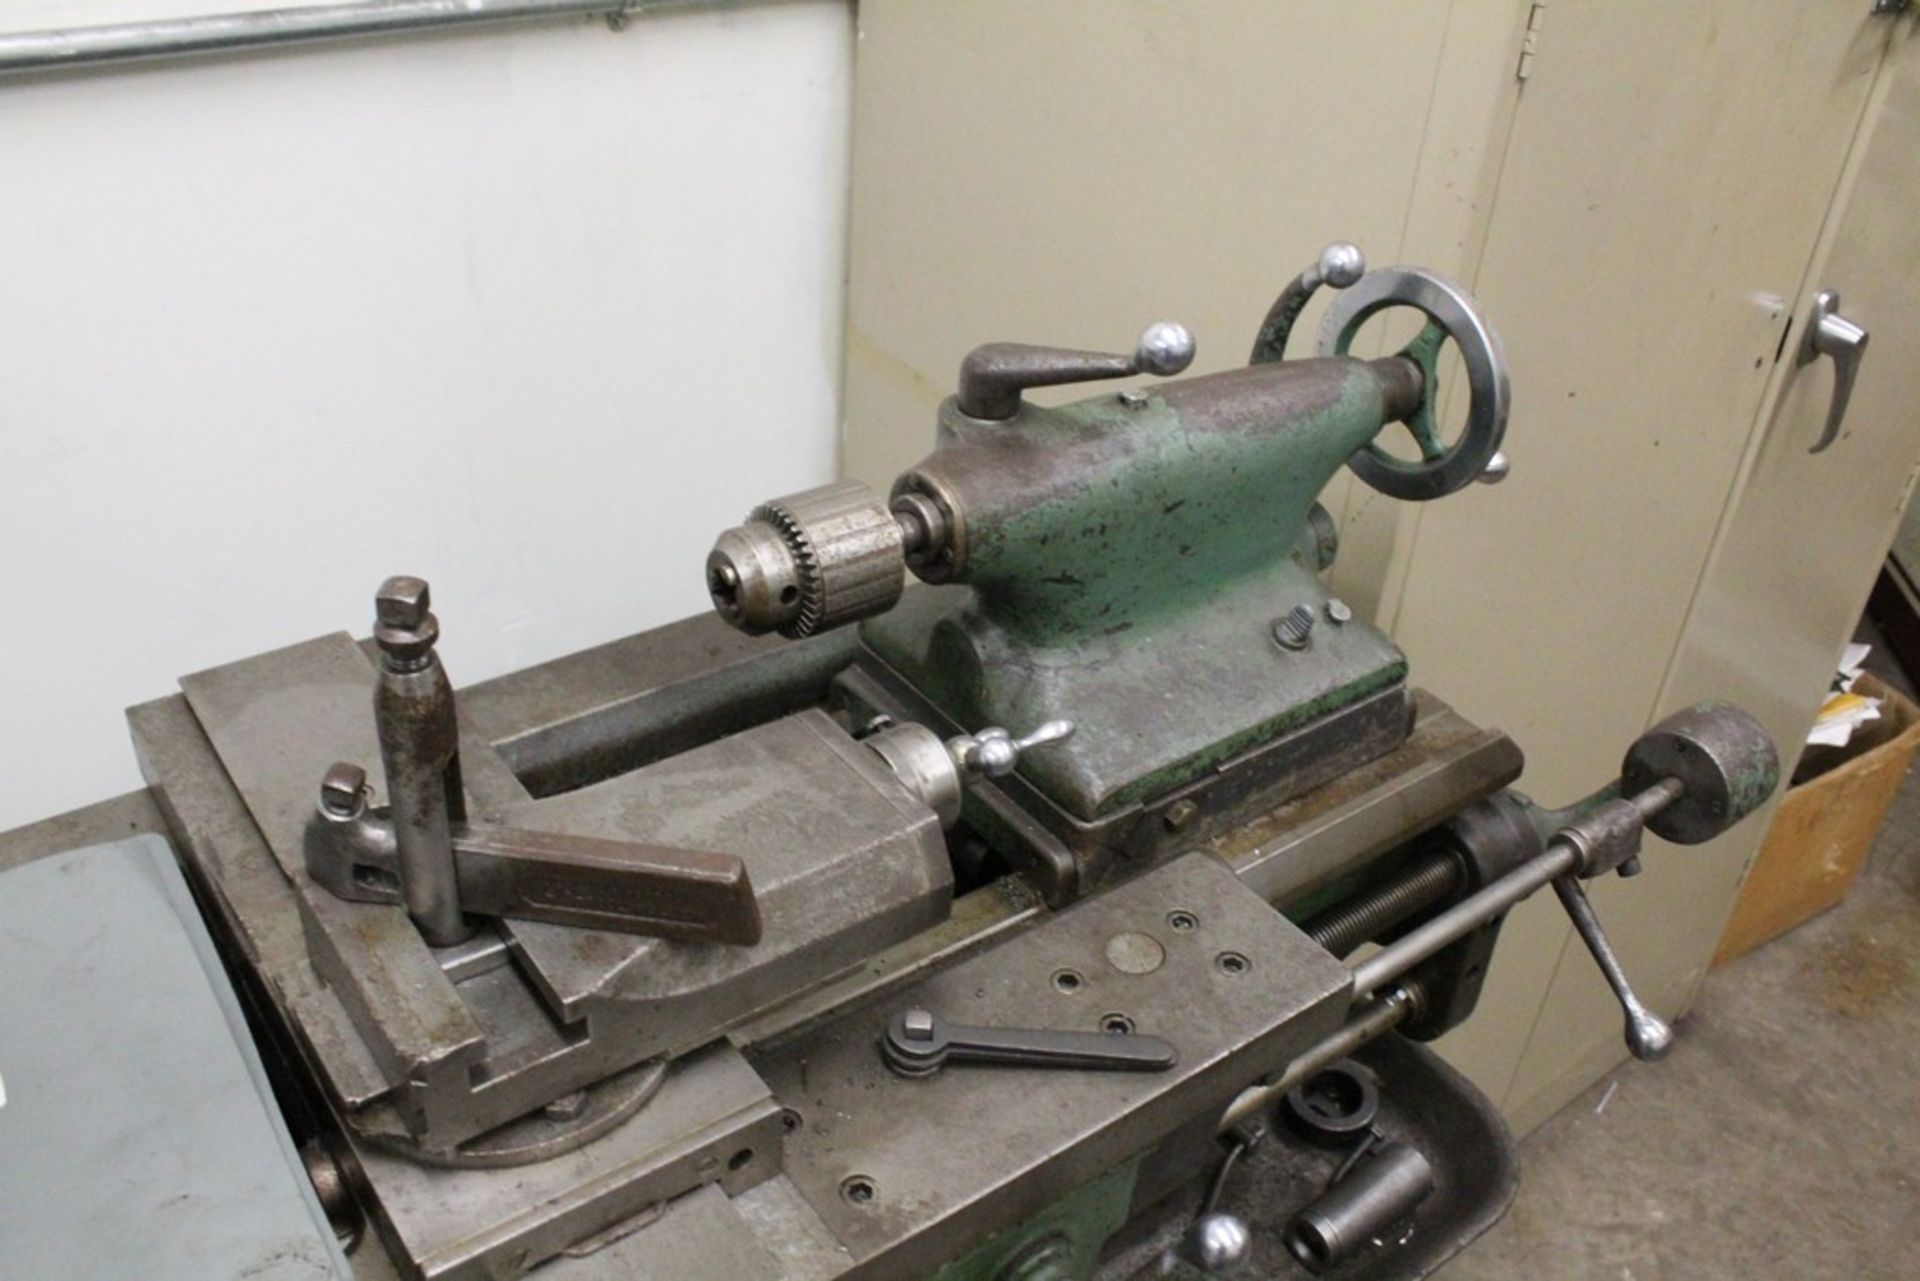 MONARCH MODEL 10 EE PRECISION TOOLROOM LATHE 26080: 12.5" SWING, 20" BETWEEN CENTERS, 8" 3-JAW - Image 7 of 10